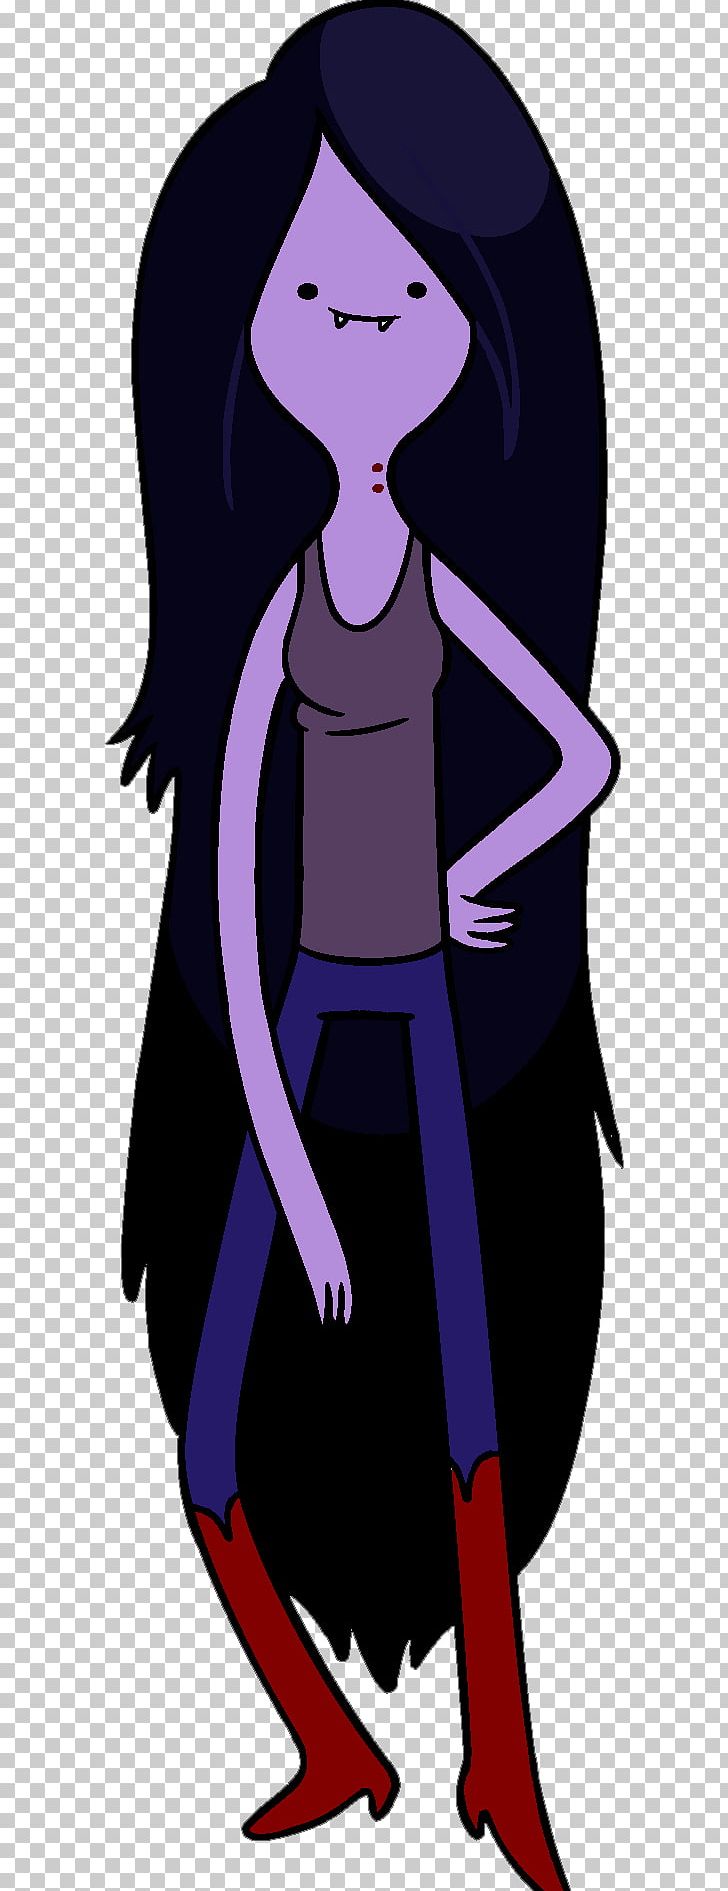 Marceline The Vampire Queen Finn The Human Ice King Princess Bubblegum Character PNG, Clipart, Adventure Time, Black Hair, Cartoon, Cartoon Network, Fictional Character Free PNG Download